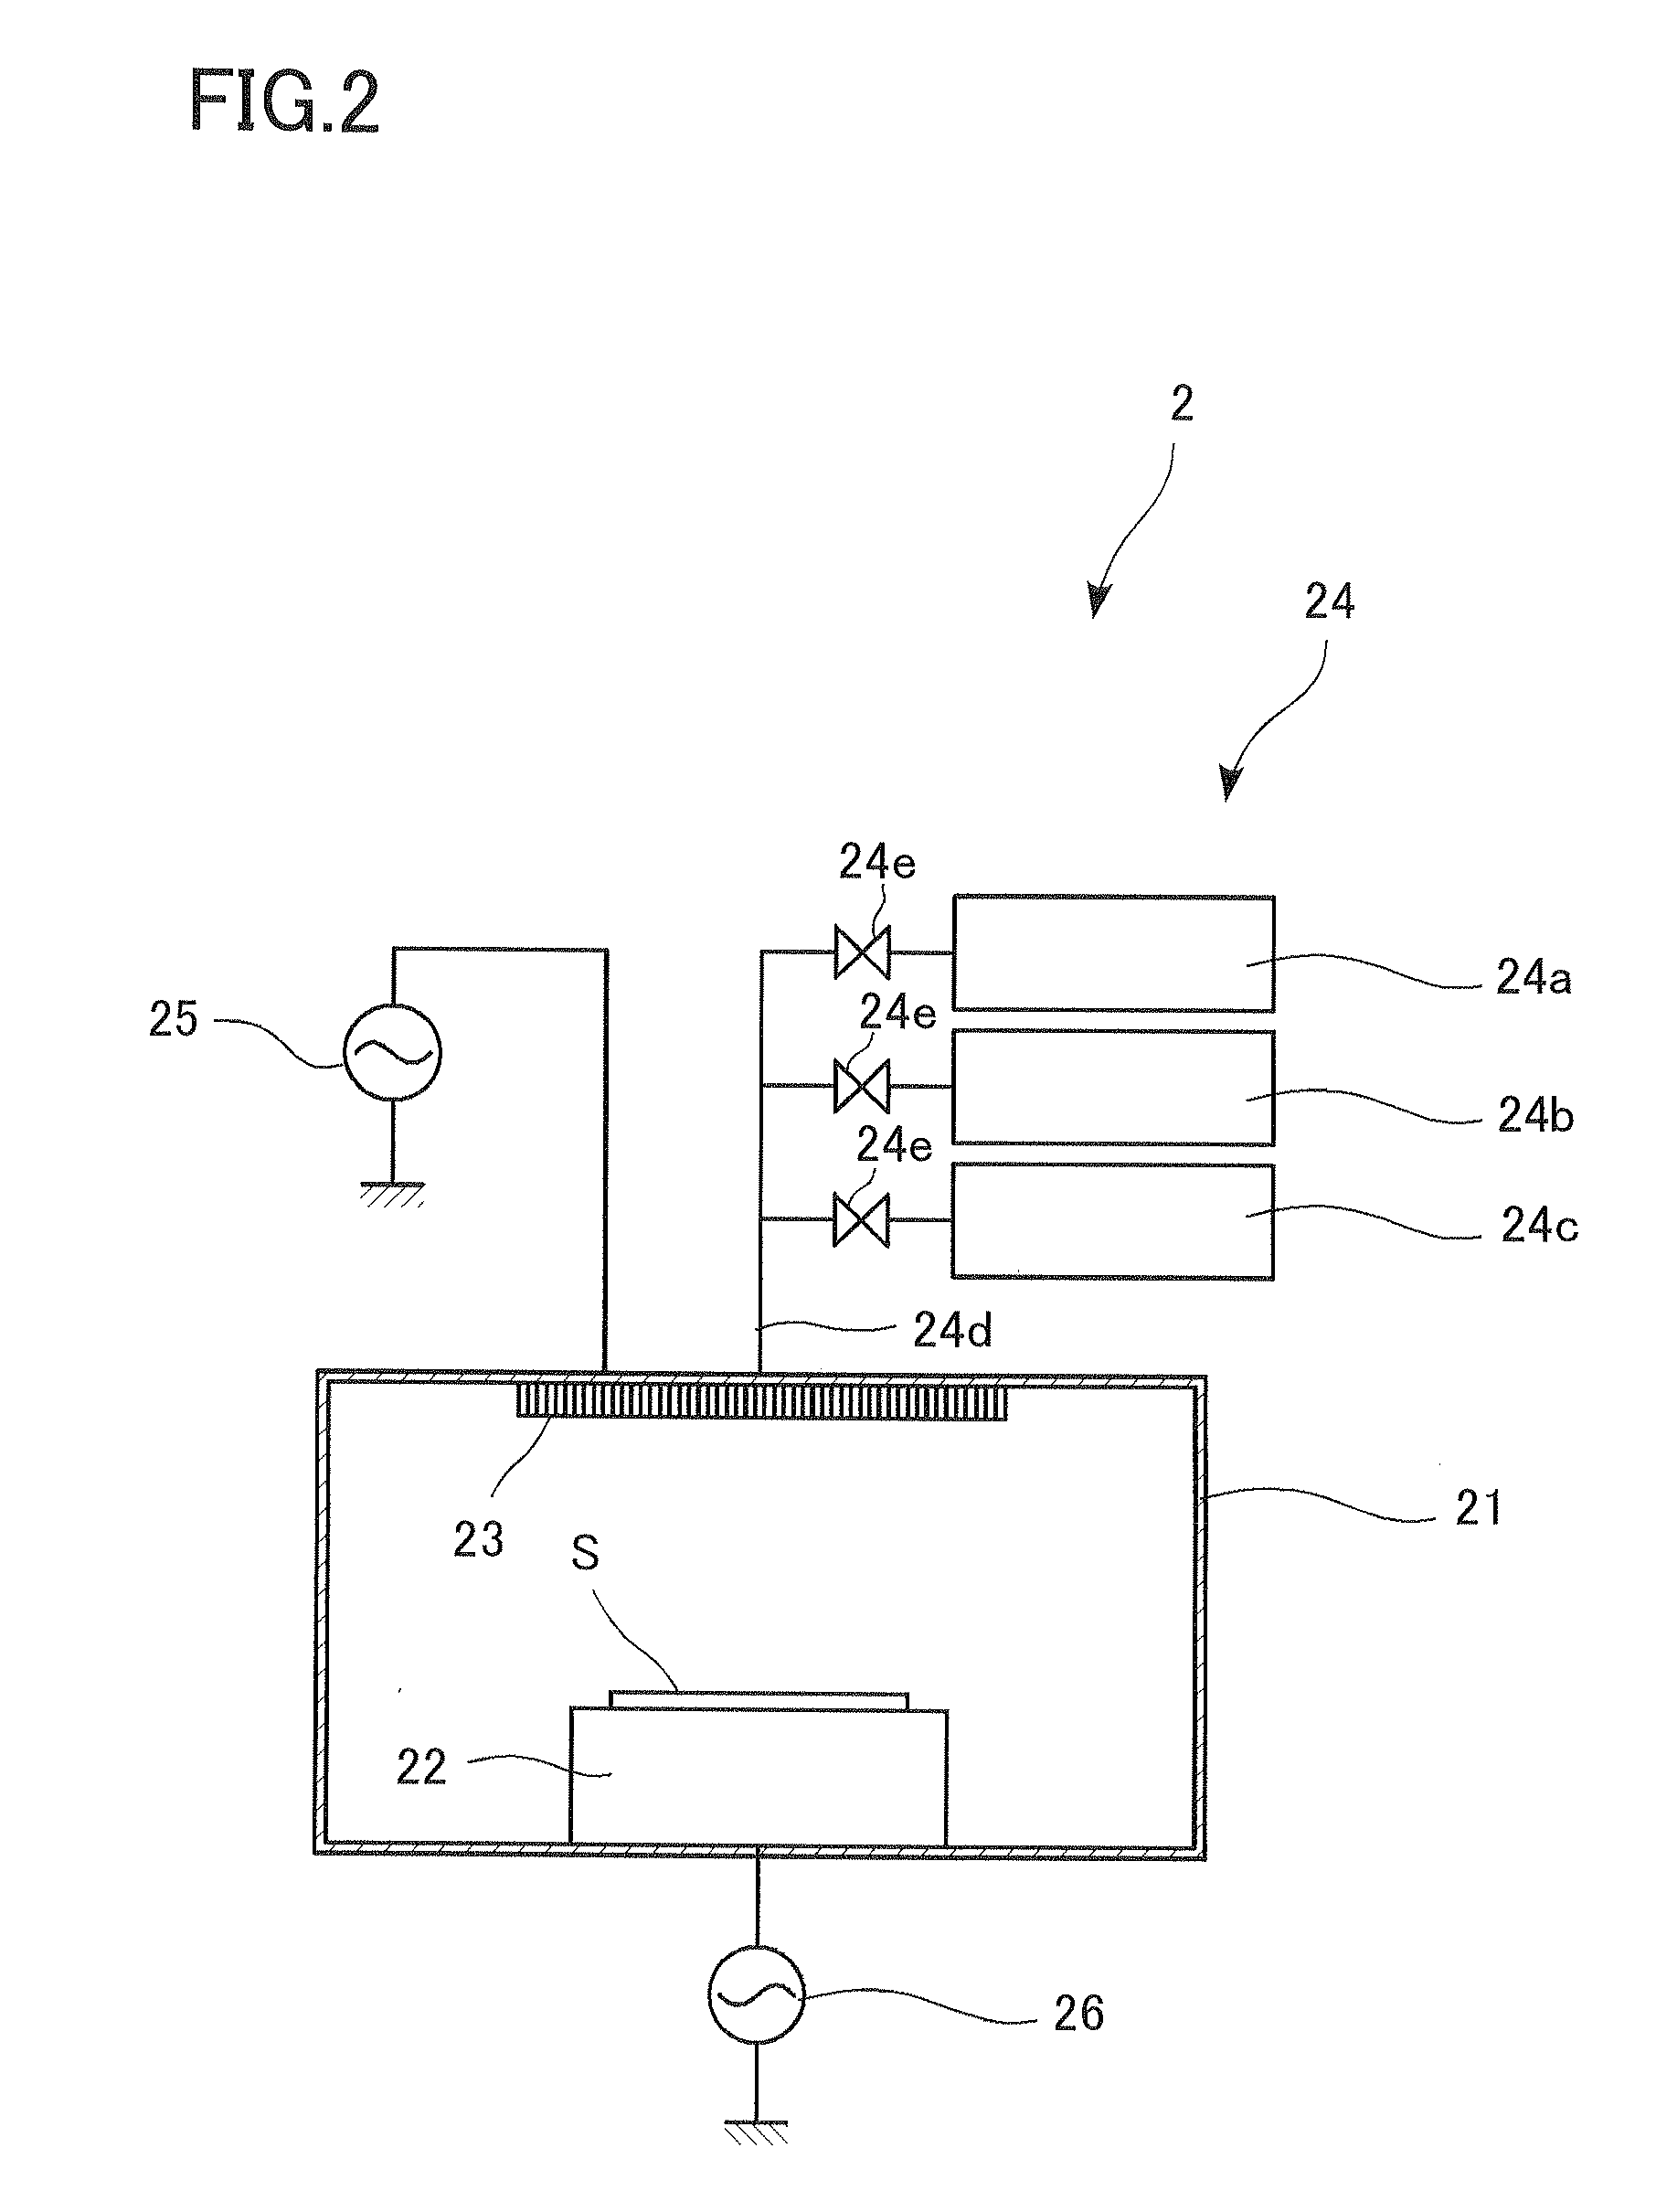 Film-forming method for forming passivation film and manufacturing method for solar cell element